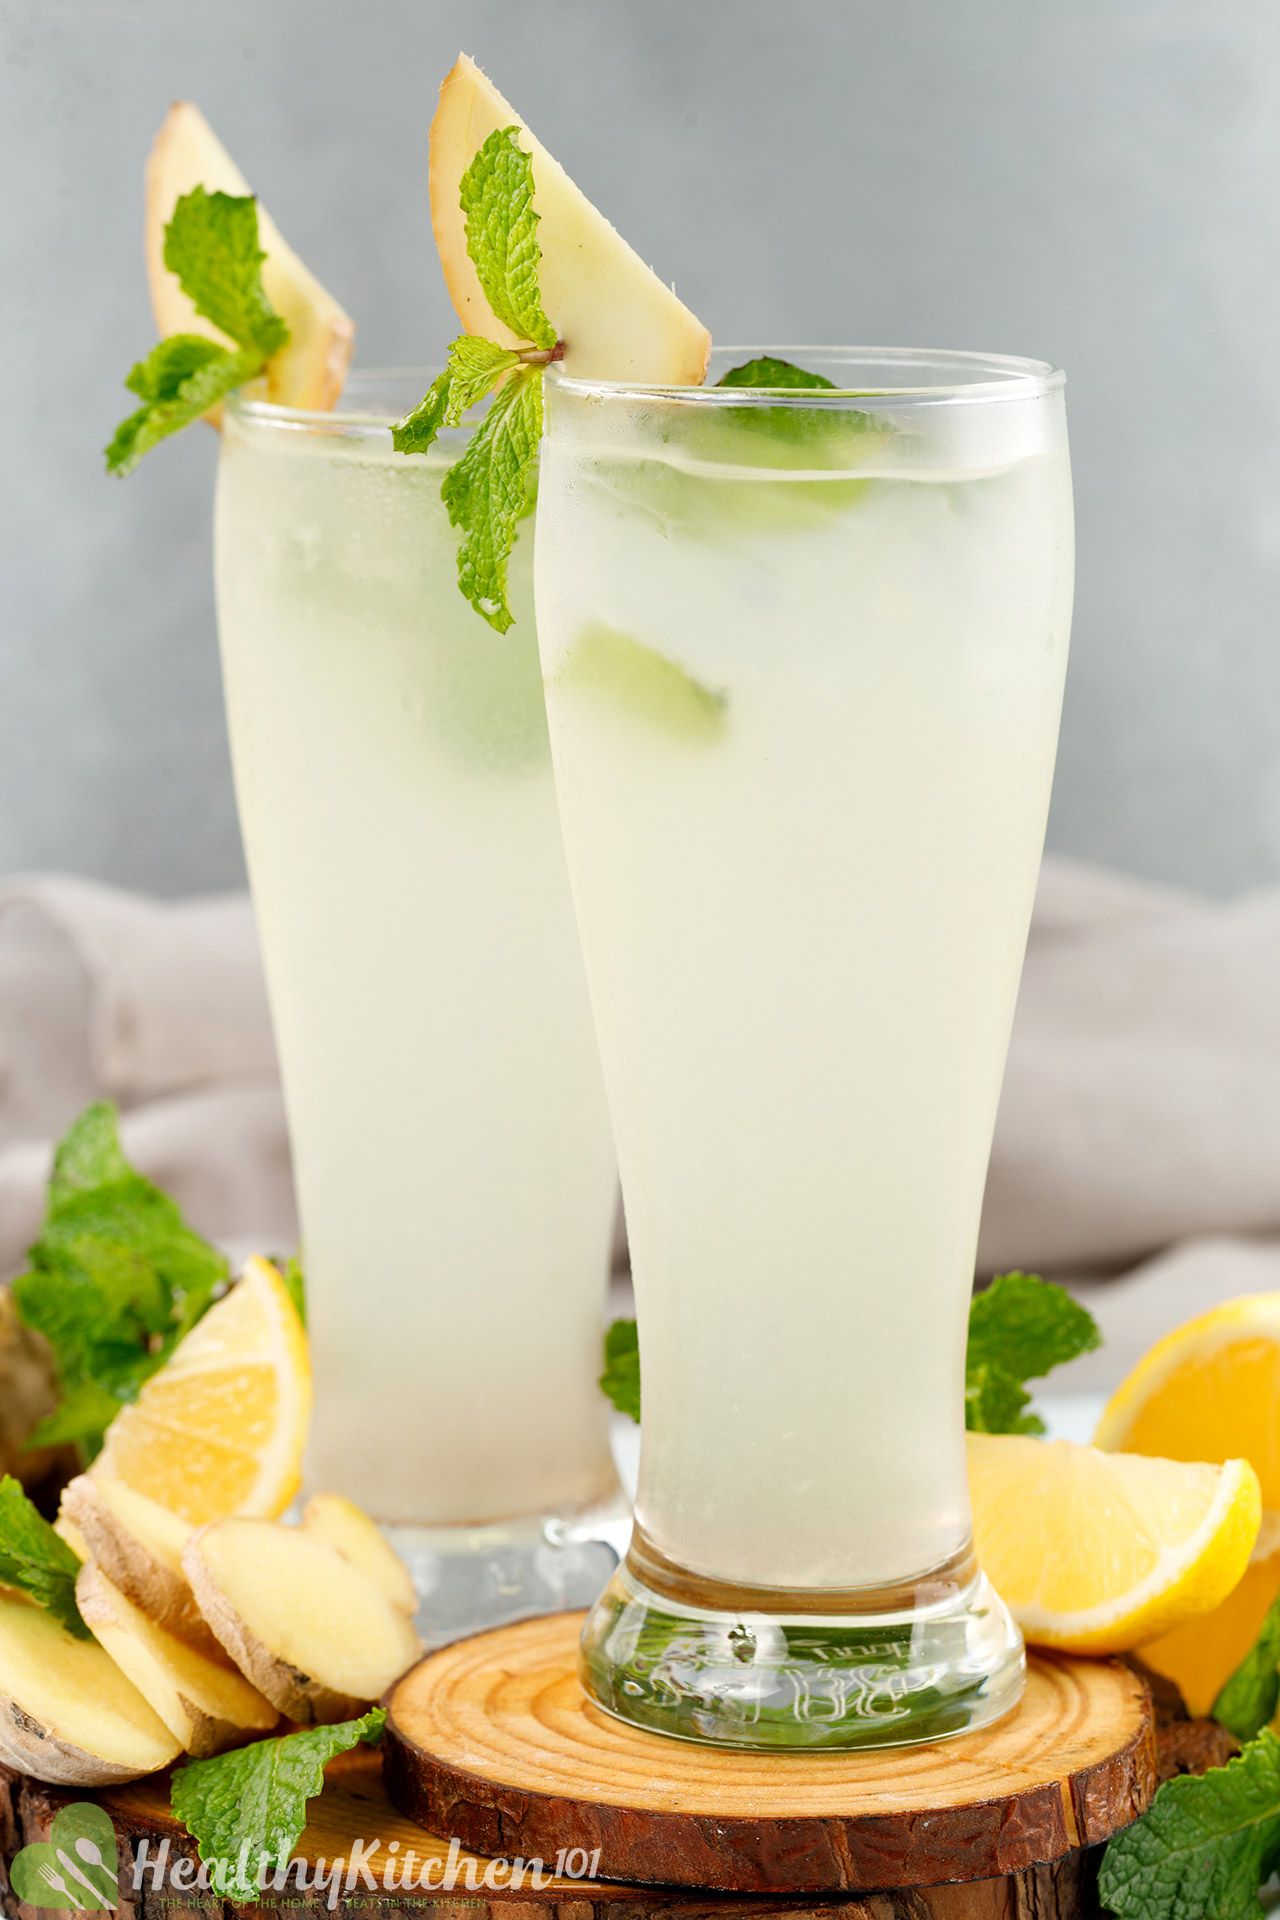 is it good to drink ginger and lemon every day